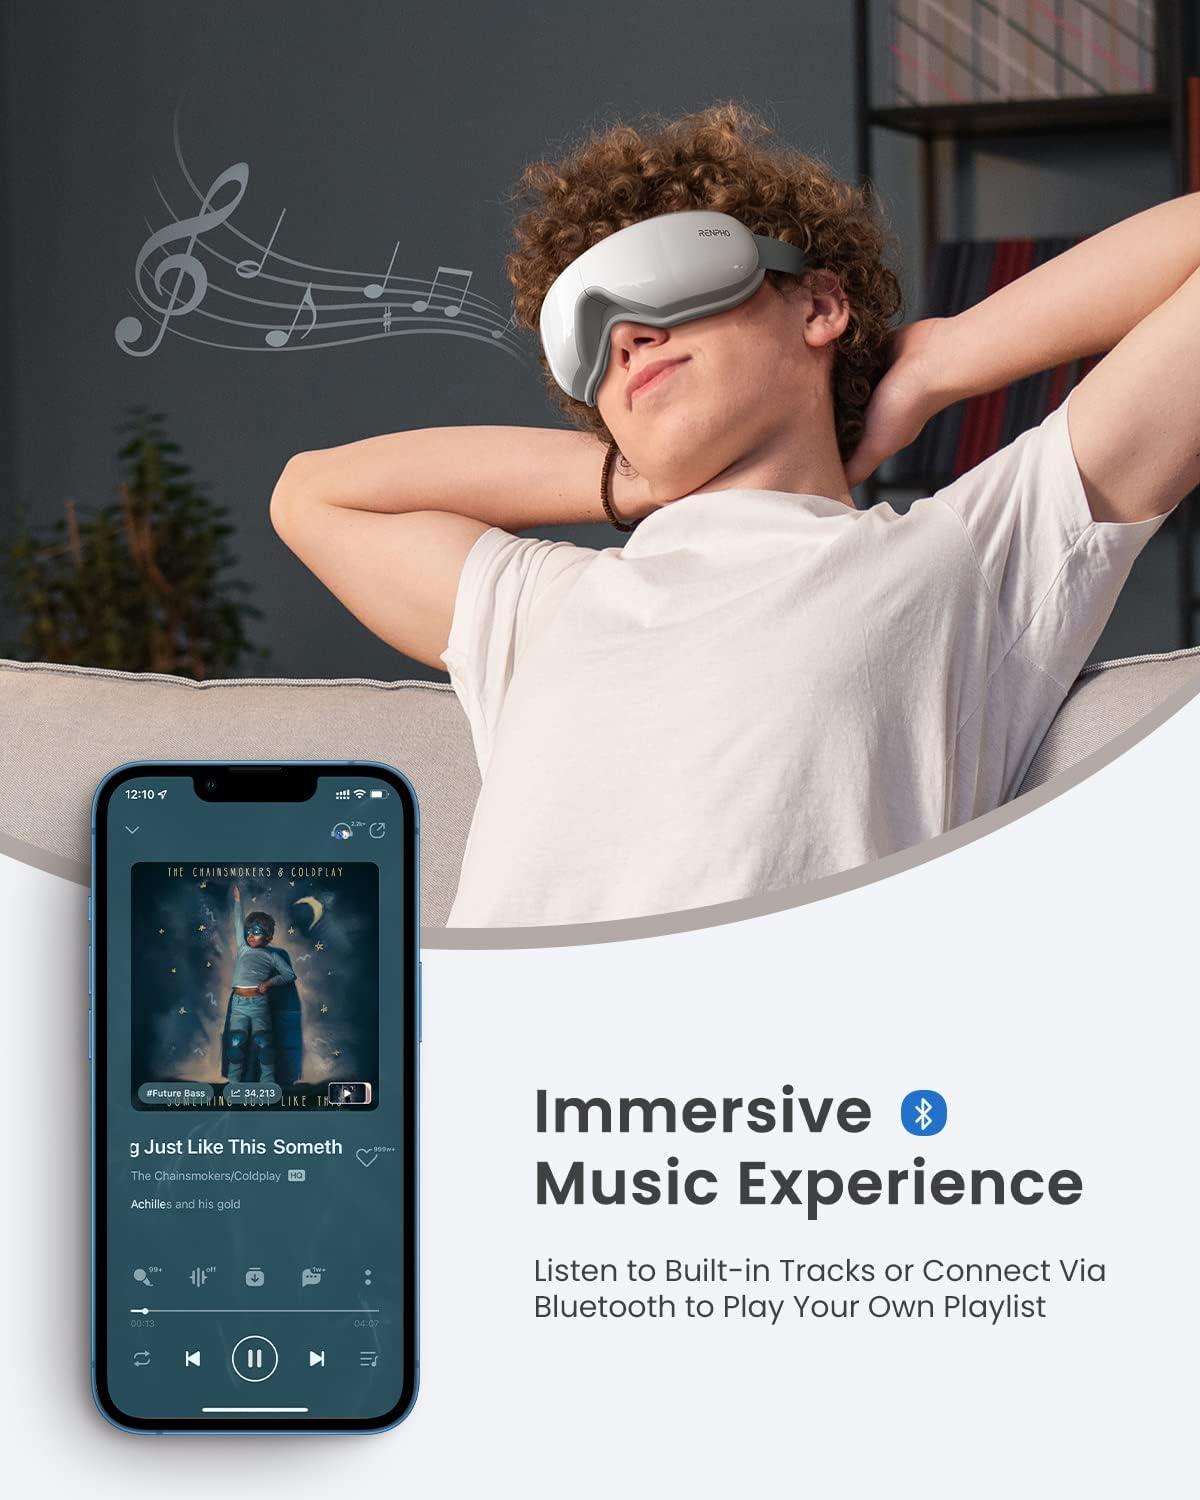 A young man reclines comfortably with a Renpho Eyeris 1 Eye Massager, enjoying music. In the foreground, a smartphone screen displays a music player app with the song "Just Like This Something." The image suggests an energizing and relaxing experience.